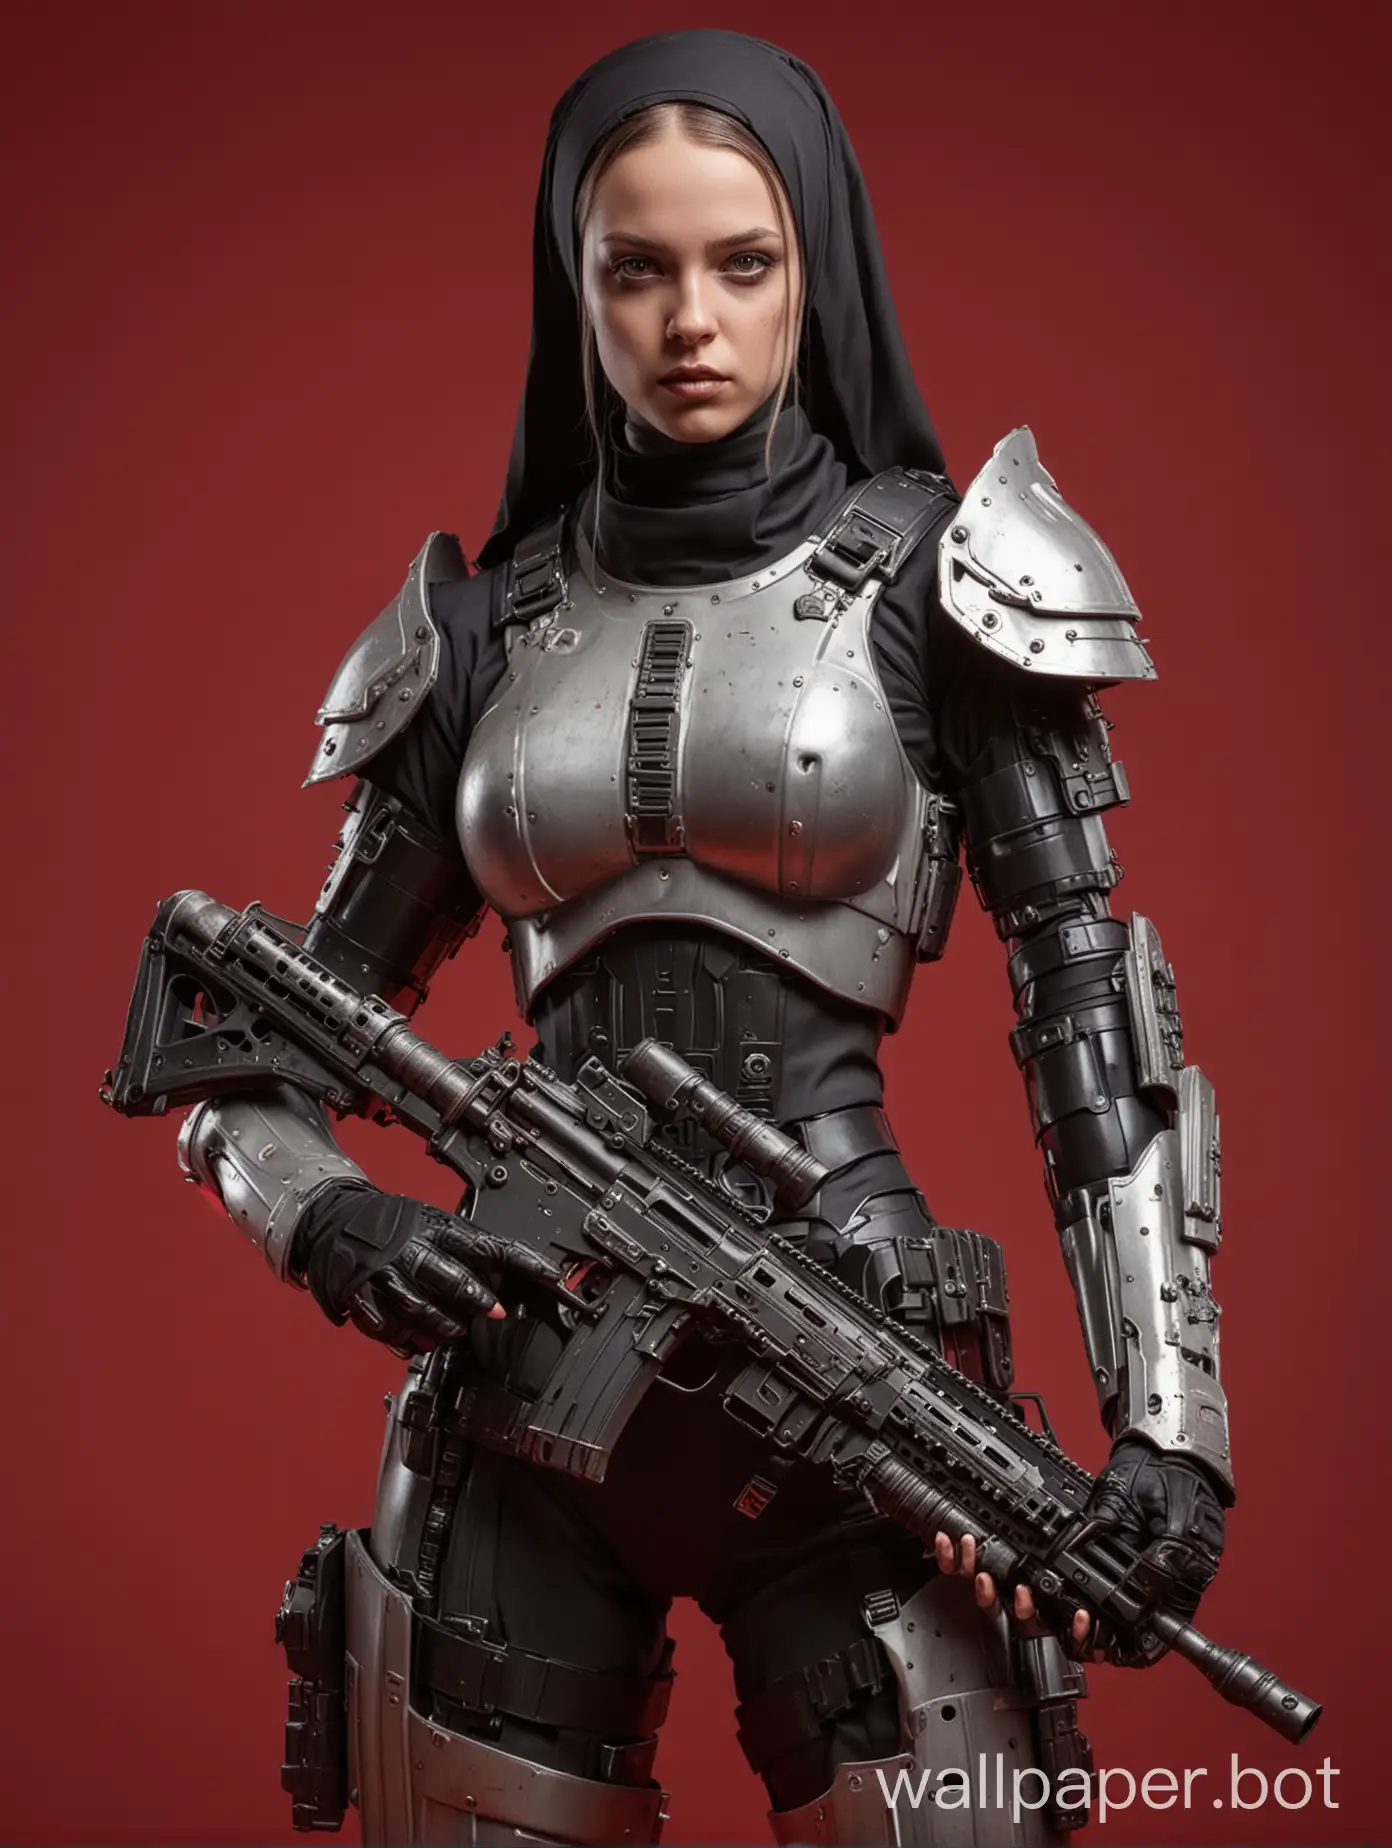 Cyberarmored-Mercenary-Nun-Girl-in-Heavy-Armor-with-Submachine-Gun-on-Red-Background